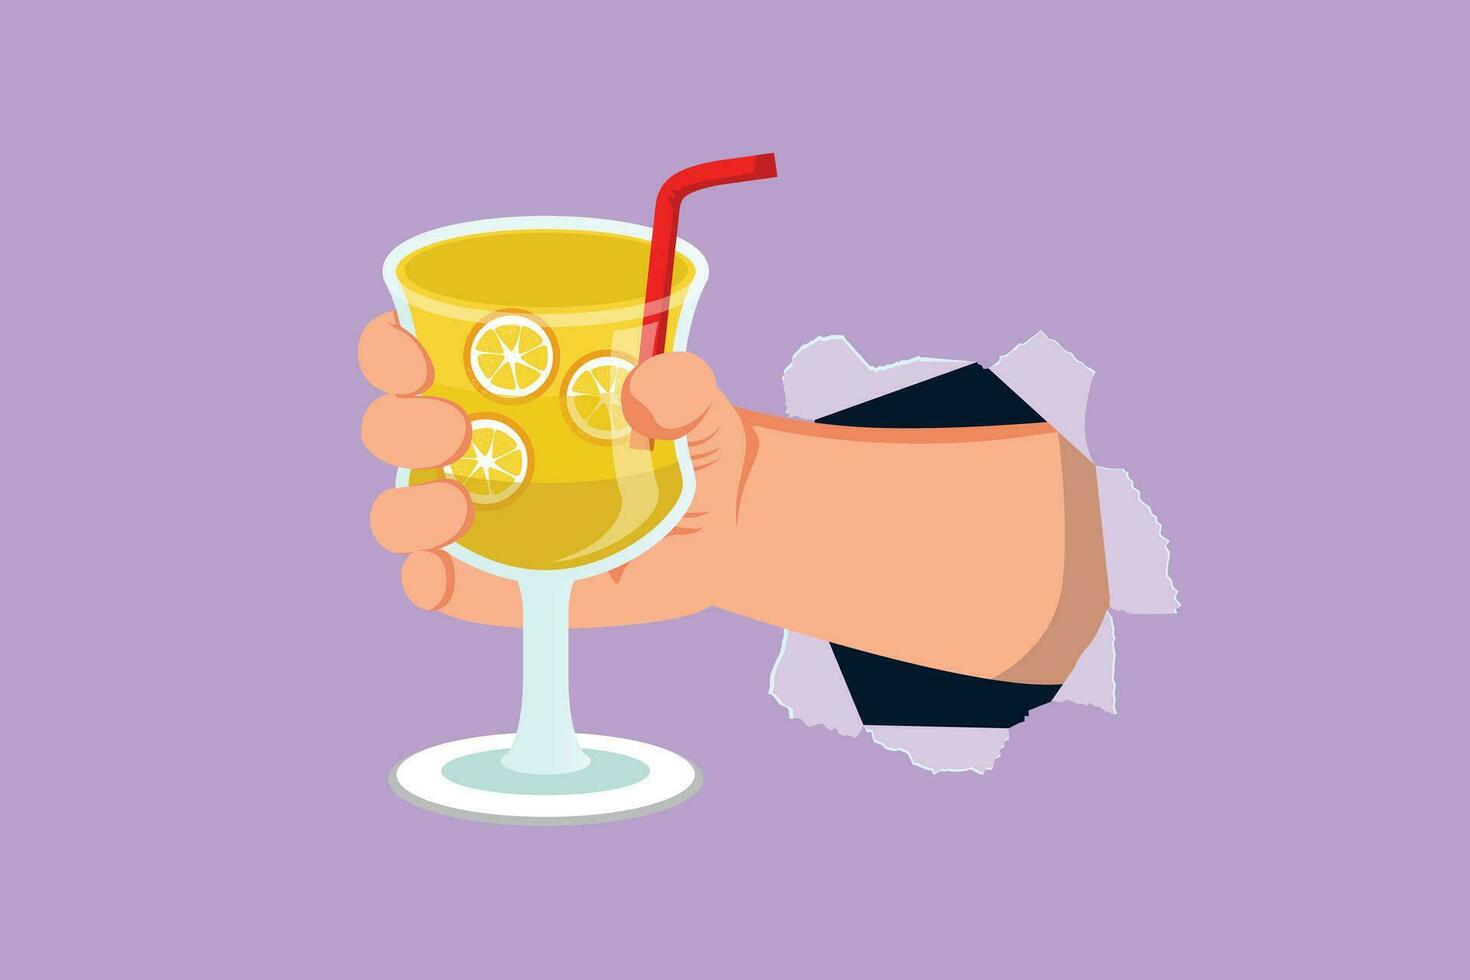 Cartoon flat style drawing hand holding glass with lemonade fruit juice through torn blue paper. Drink made of fresh lemon juice. Juicy orange water. Relaxing time. Graphic design vector illustration